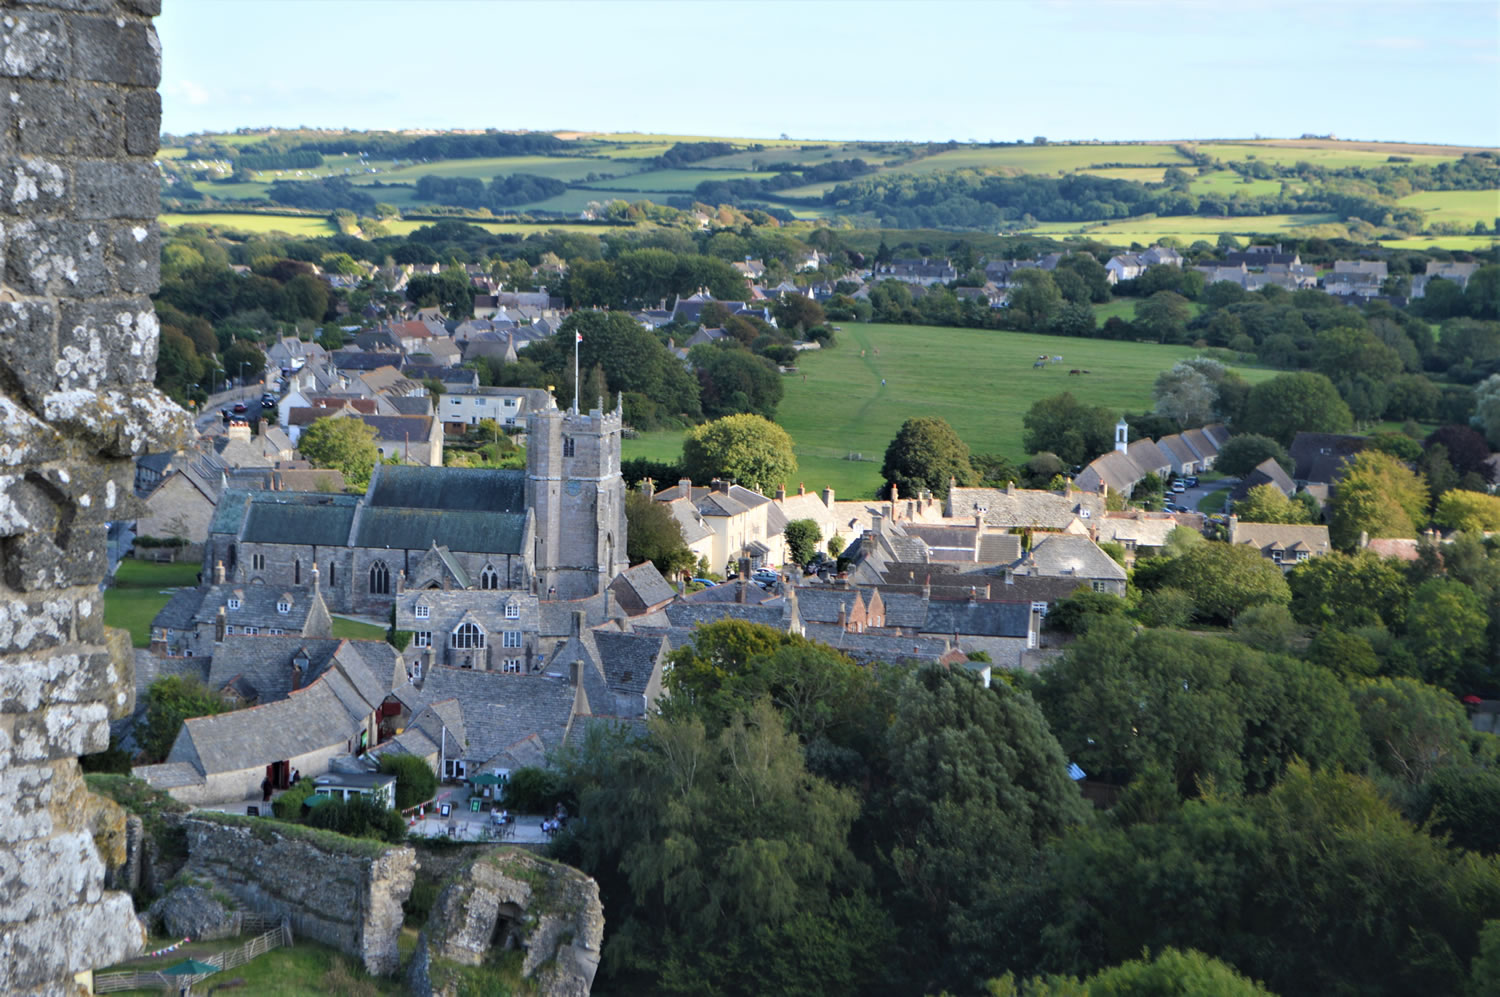 The village of Corfe Castle, Dorset taken from the ramparts of the ruined castle of the same name. Image Copyright N.Thorne 2020